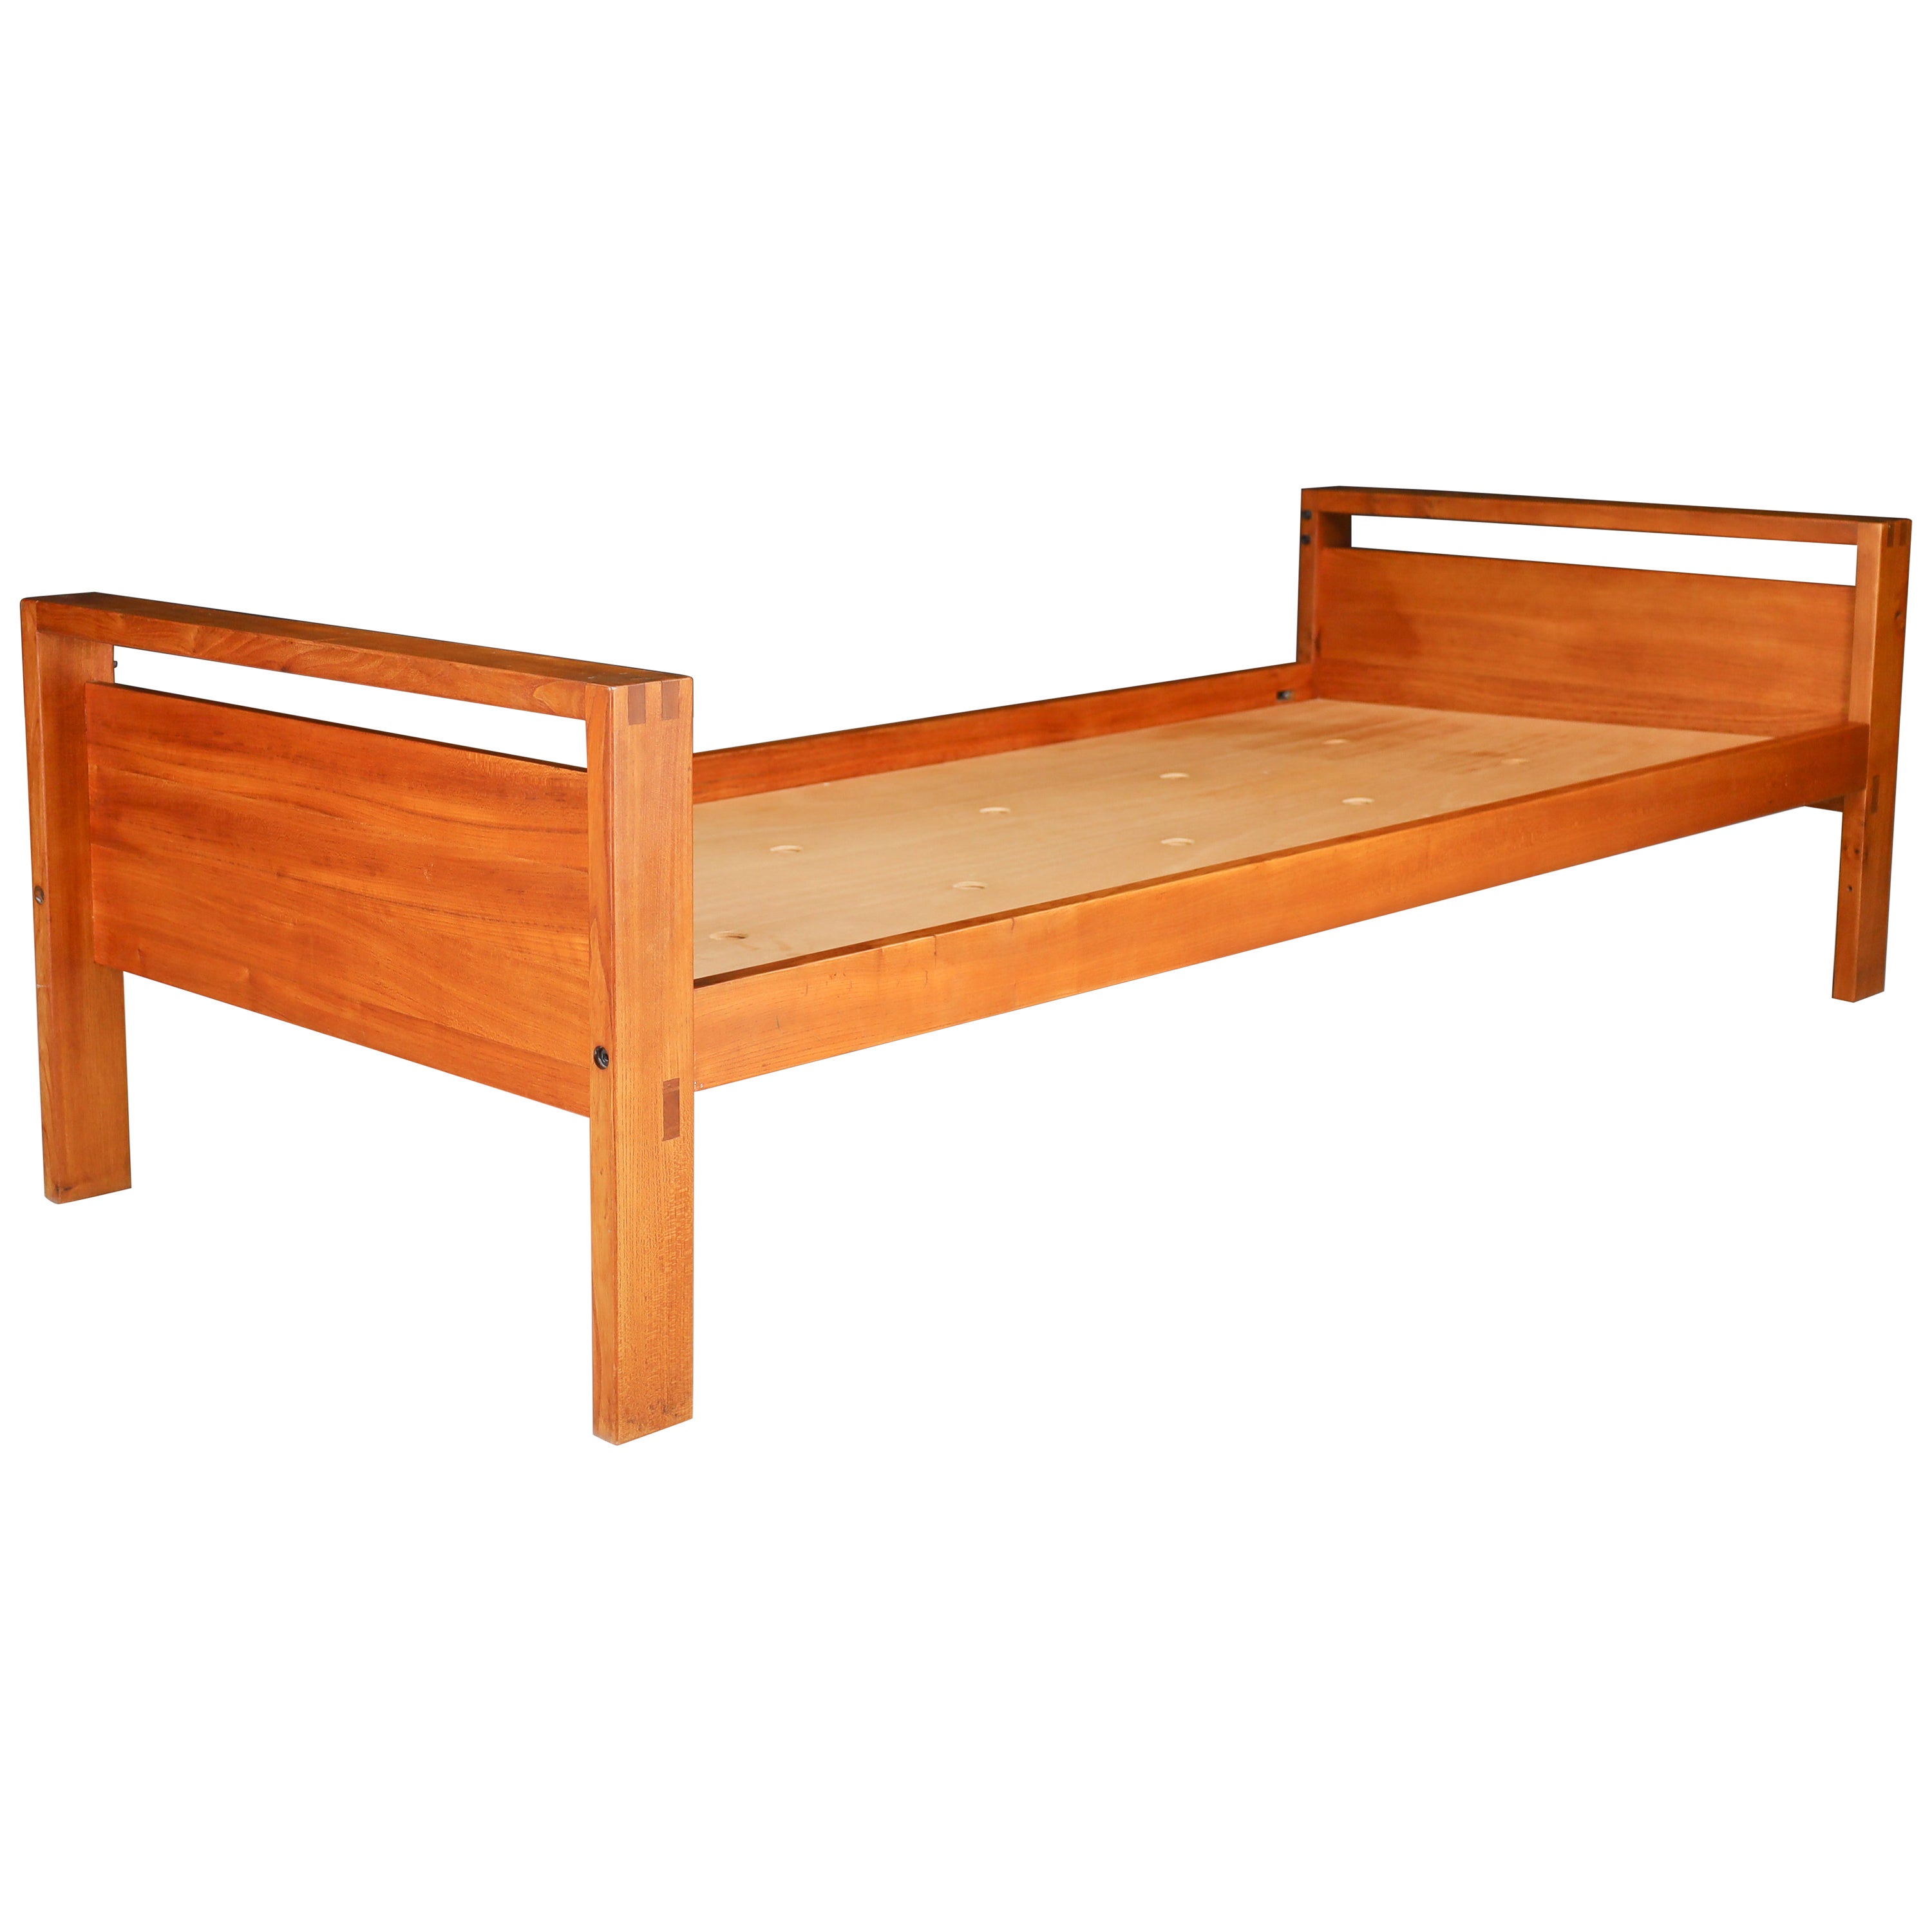 Midcentury Pierre Chapo Lo6a Bed, Daybed in Solid Elm Wood, France, 1960s